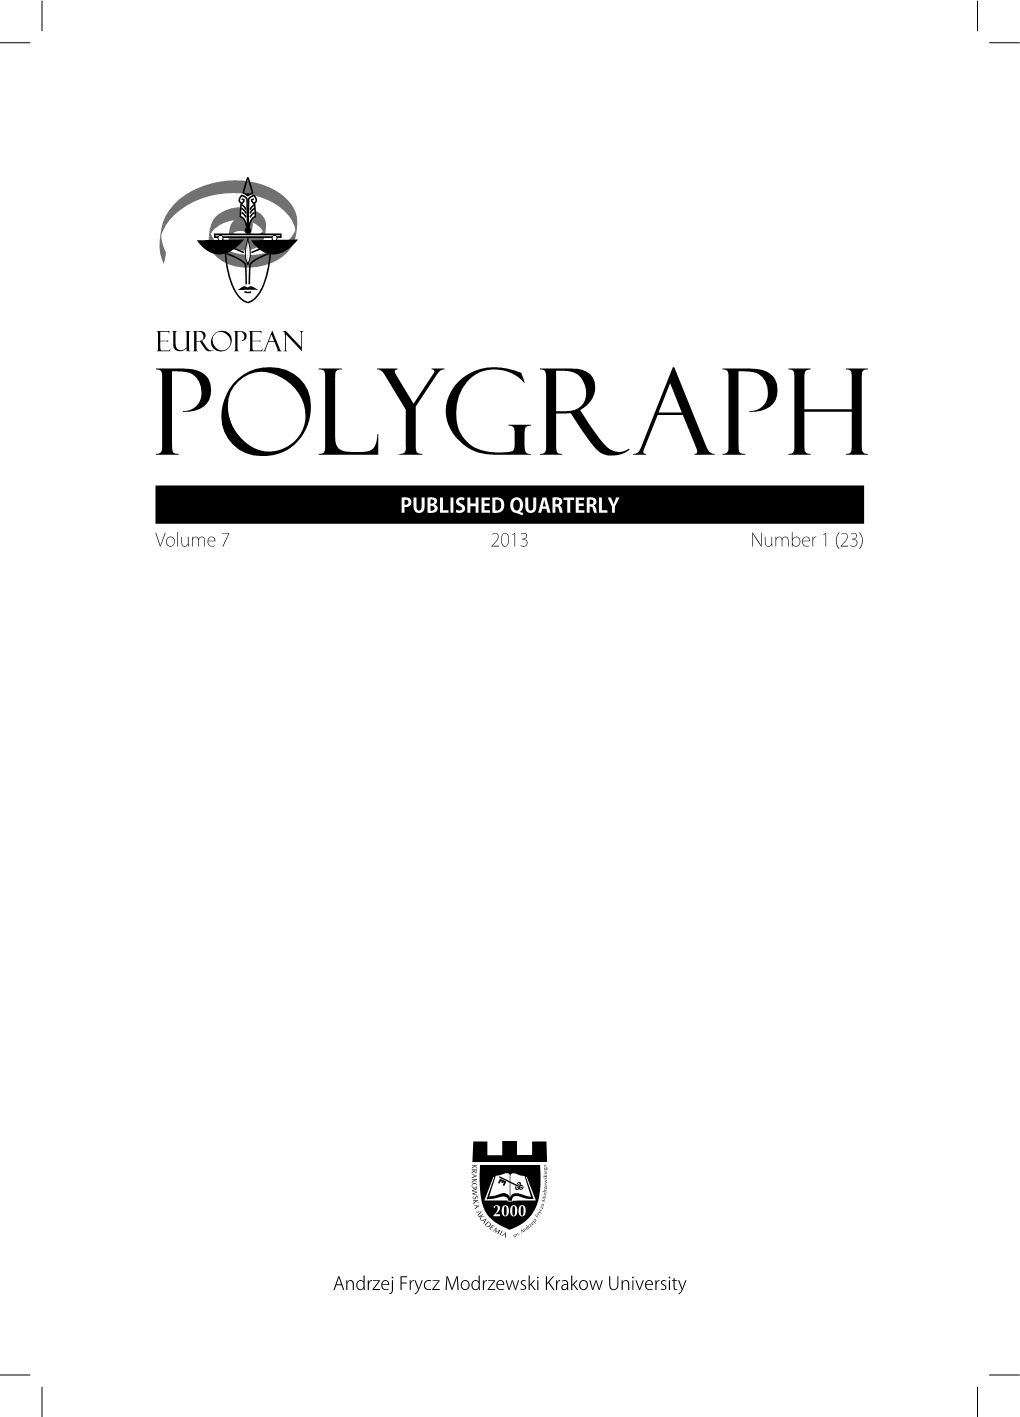 Comparative Review of Polygraph and Other Diagnostic Tools and Methods